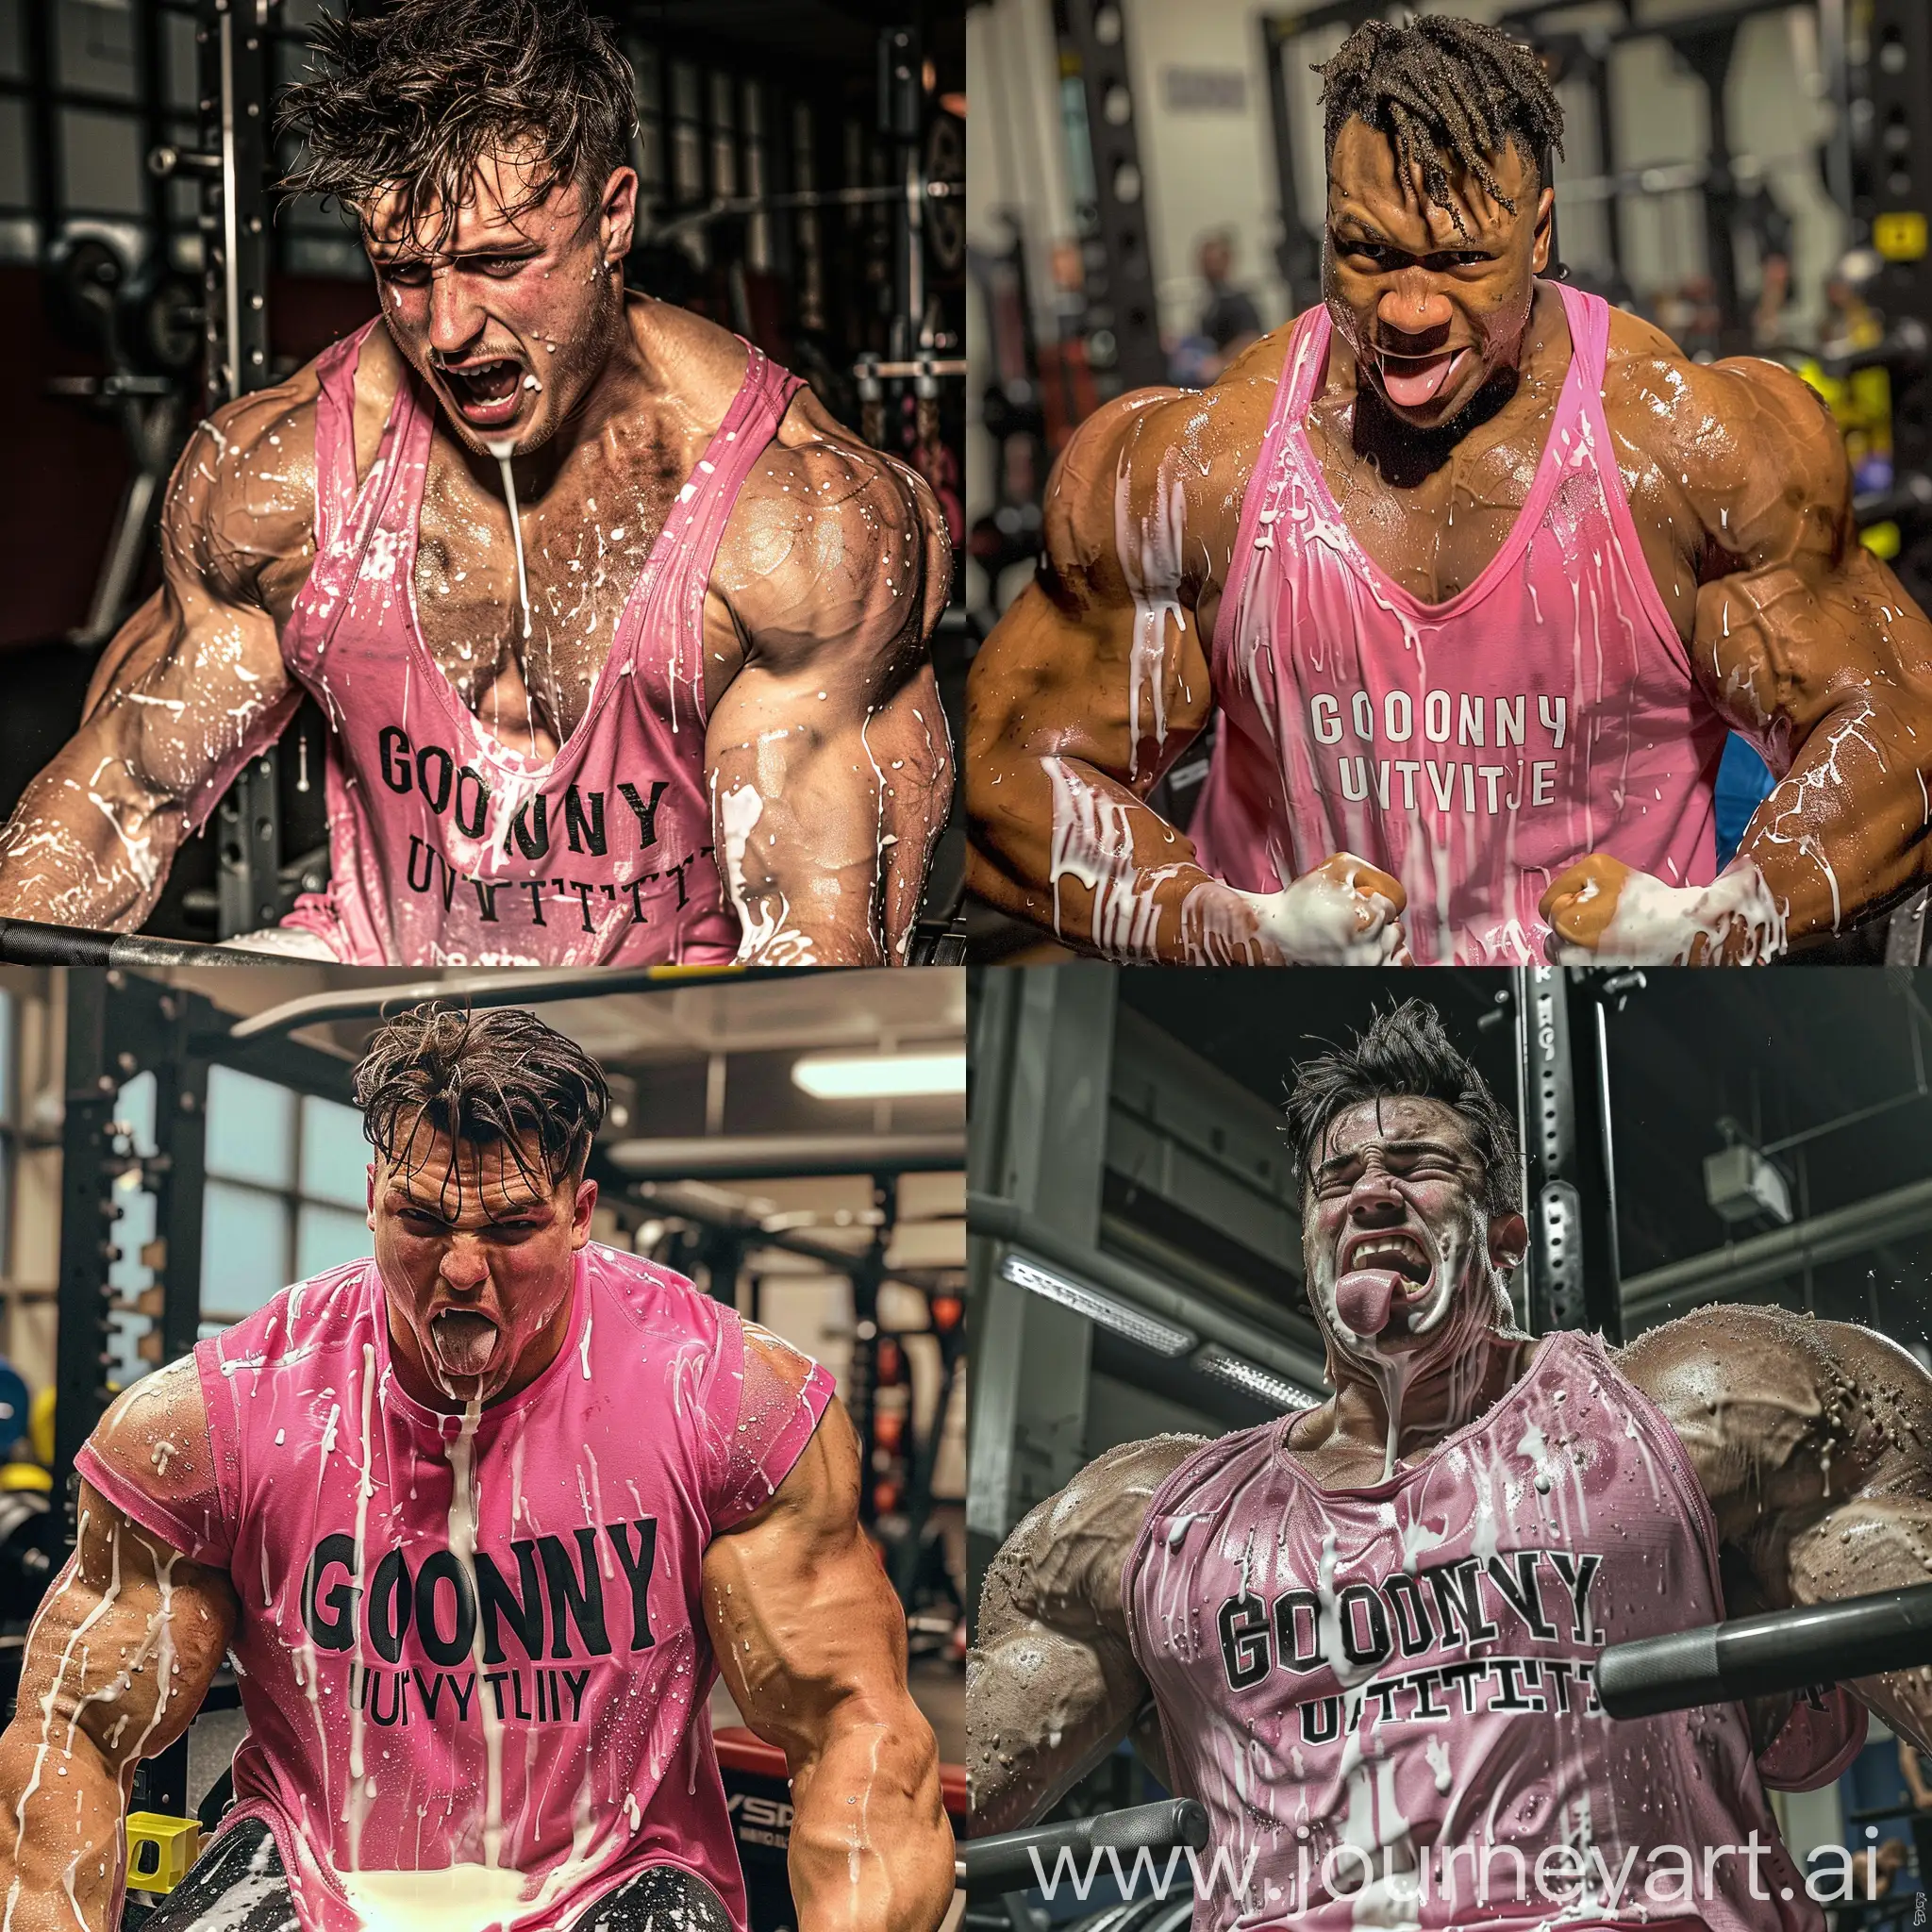 college football jock wearing a pink stringer that is soaked with sweat and says "goony university". He is in the gym on the bench press. The sweat has matted his hair. There is milk spilled all over him.
He is super ripped. He has a blank expression in his eyes but is grinning with his tongue hanging out.